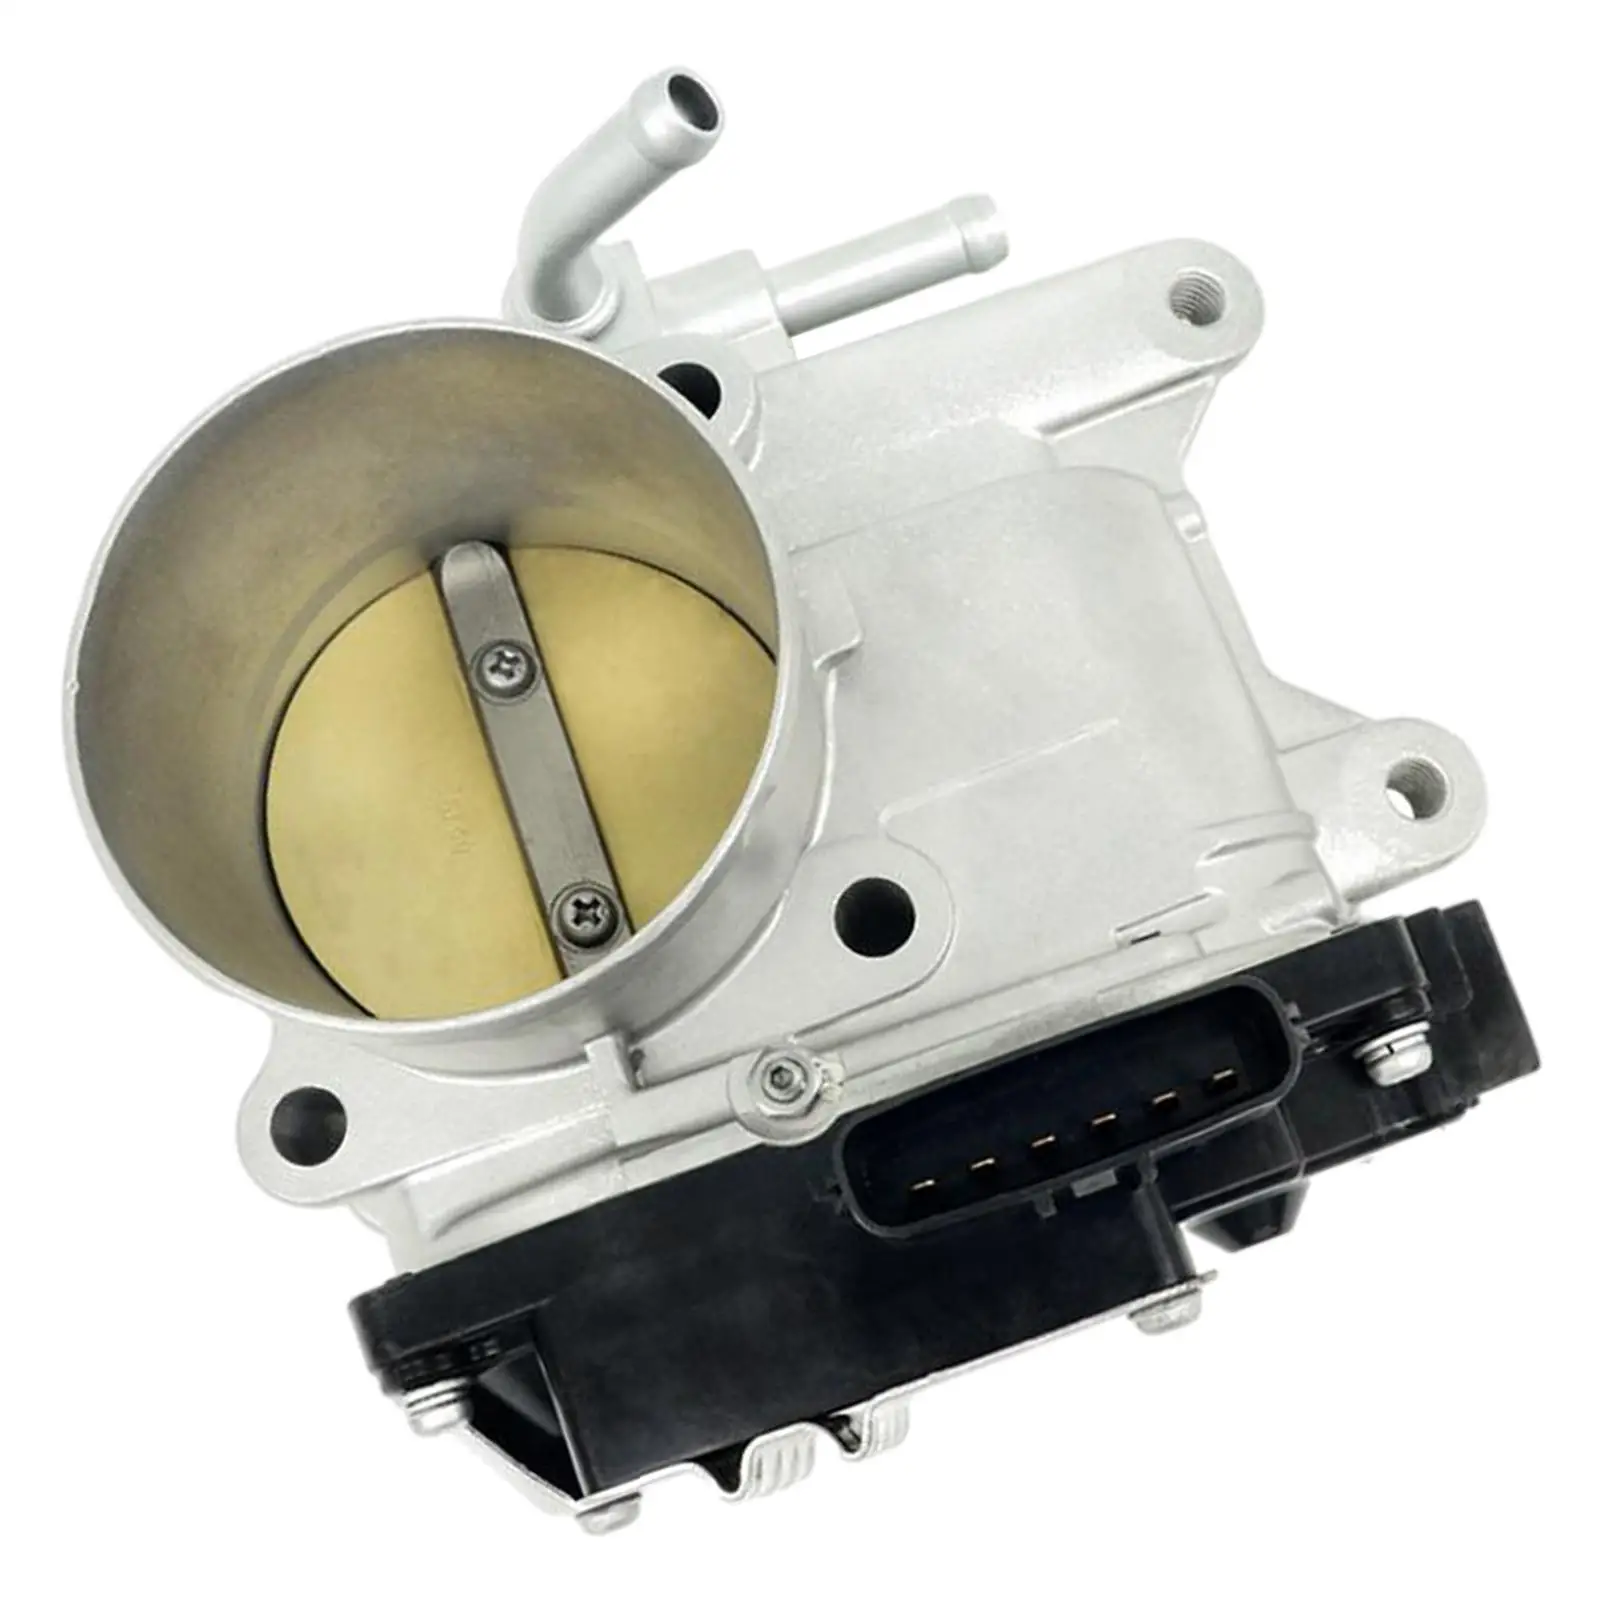 Engine Throttle Body , Fit for  Outlander 2009, Parts Easy to Install 1450A102